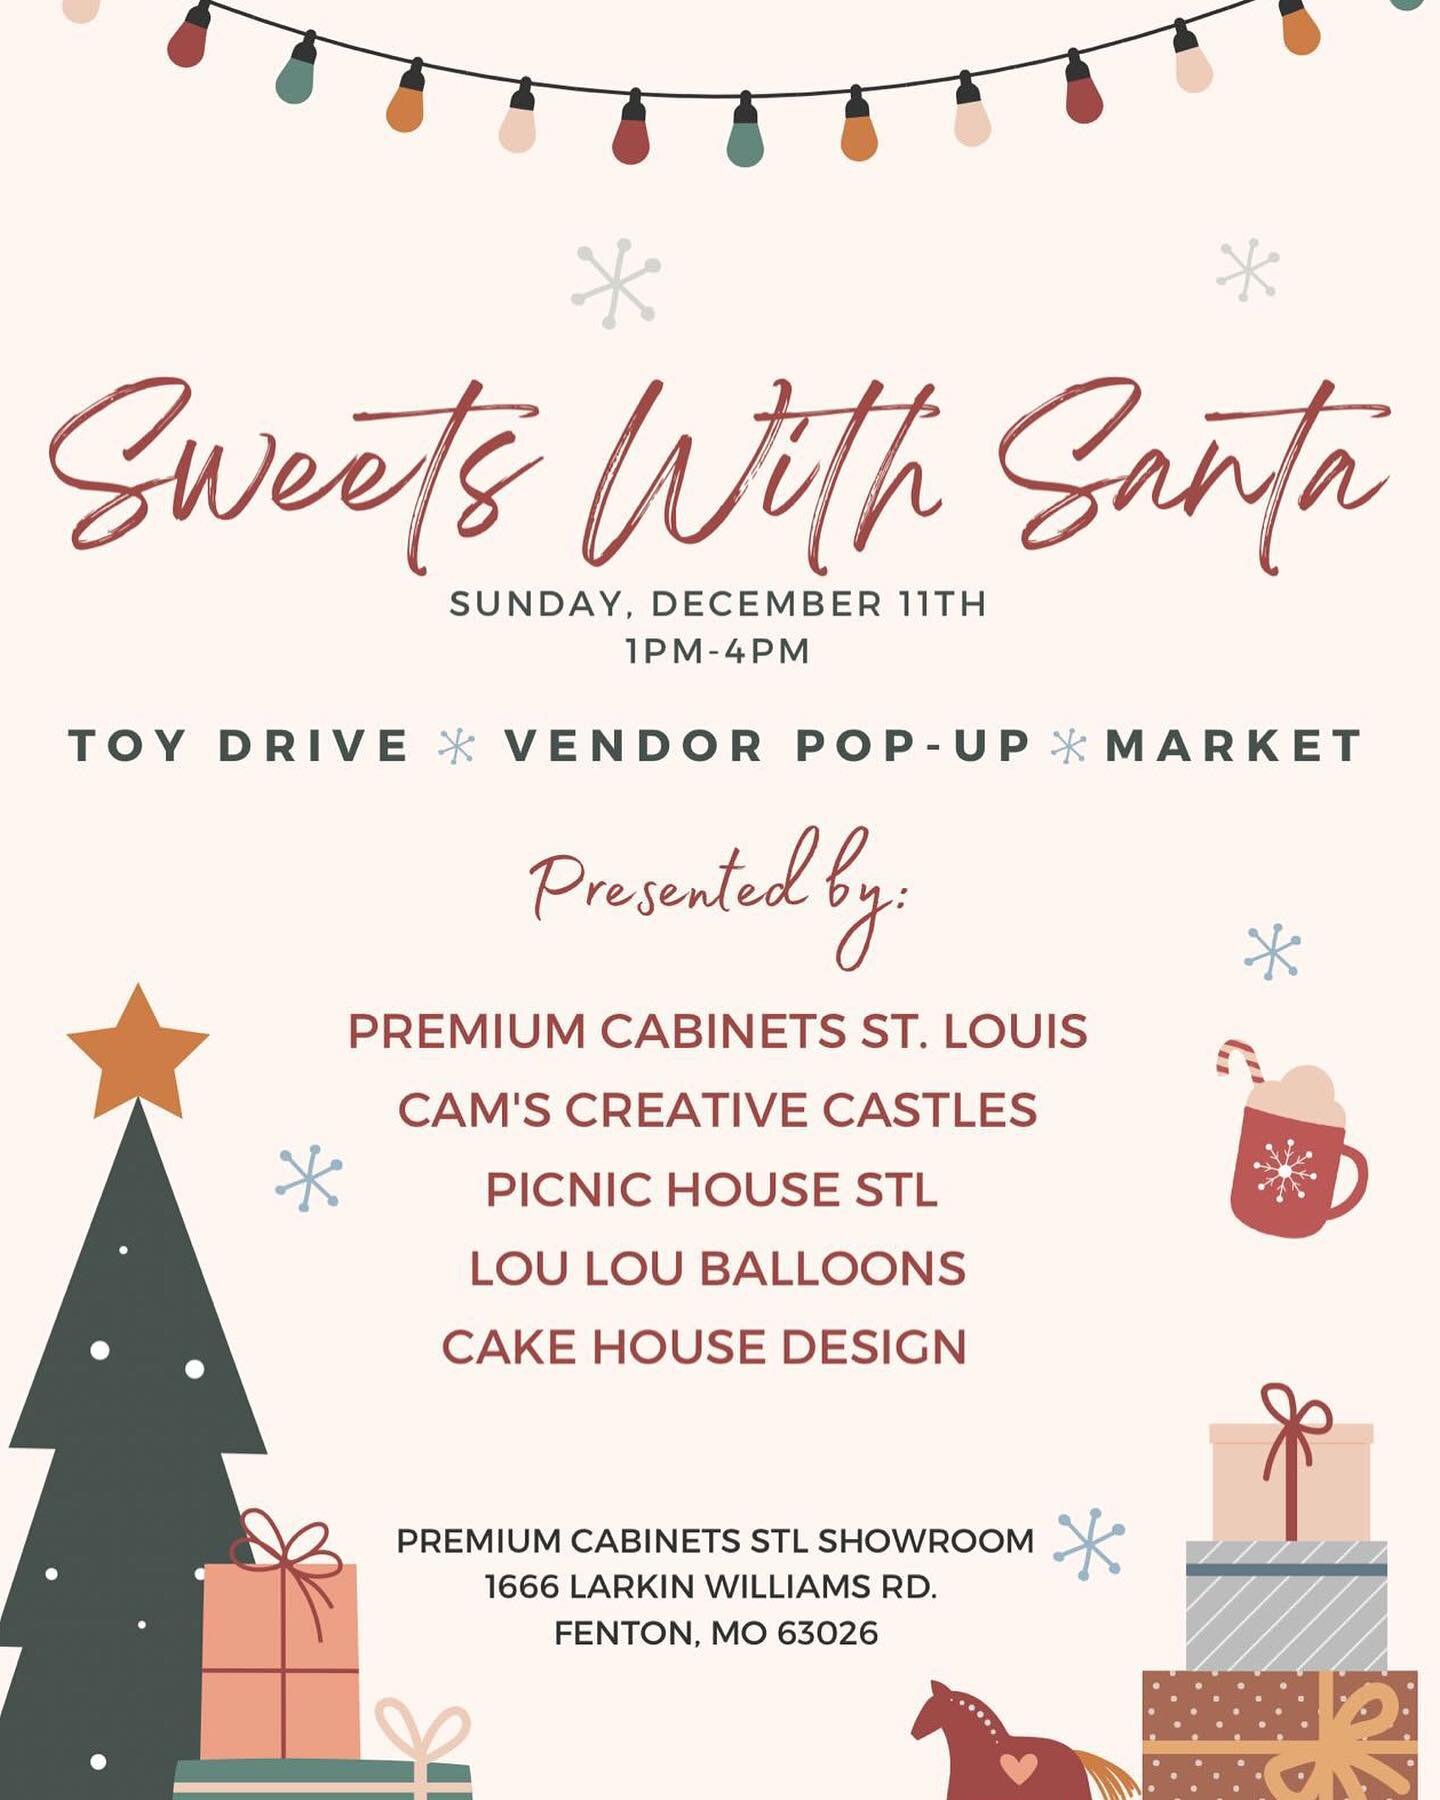 Sweets with Santa. 🎄
Premium Cabinets is teaming up with several of our community&rsquo;s amazing vendors to get the greater St. Louis area in the holiday spirit!
Join us in our showroom on Sunday, December 11th from 1 - 4 pm and enjoy holiday inspi